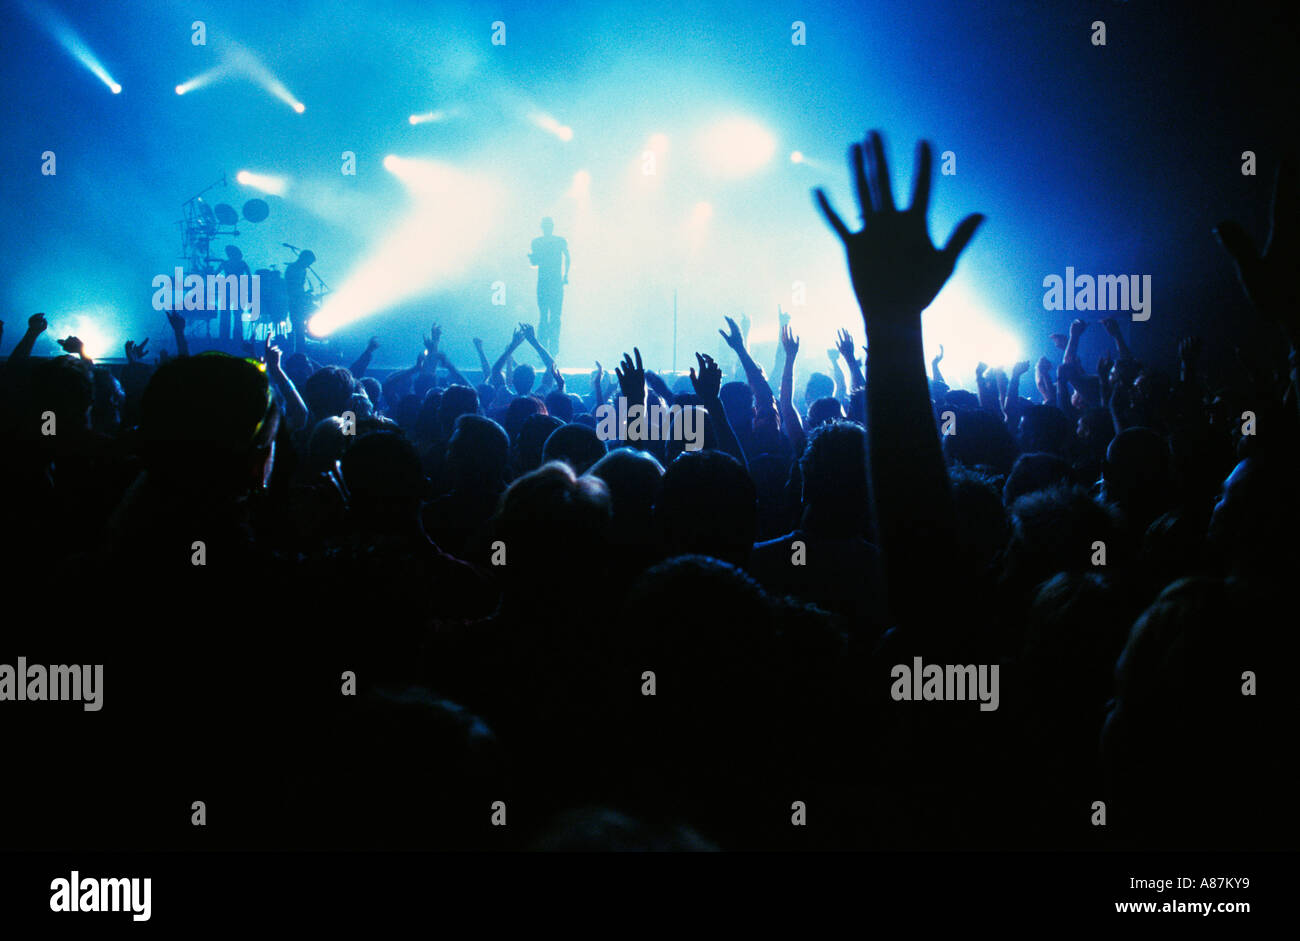 Crowd with hands in the air at a gig Stock Photo